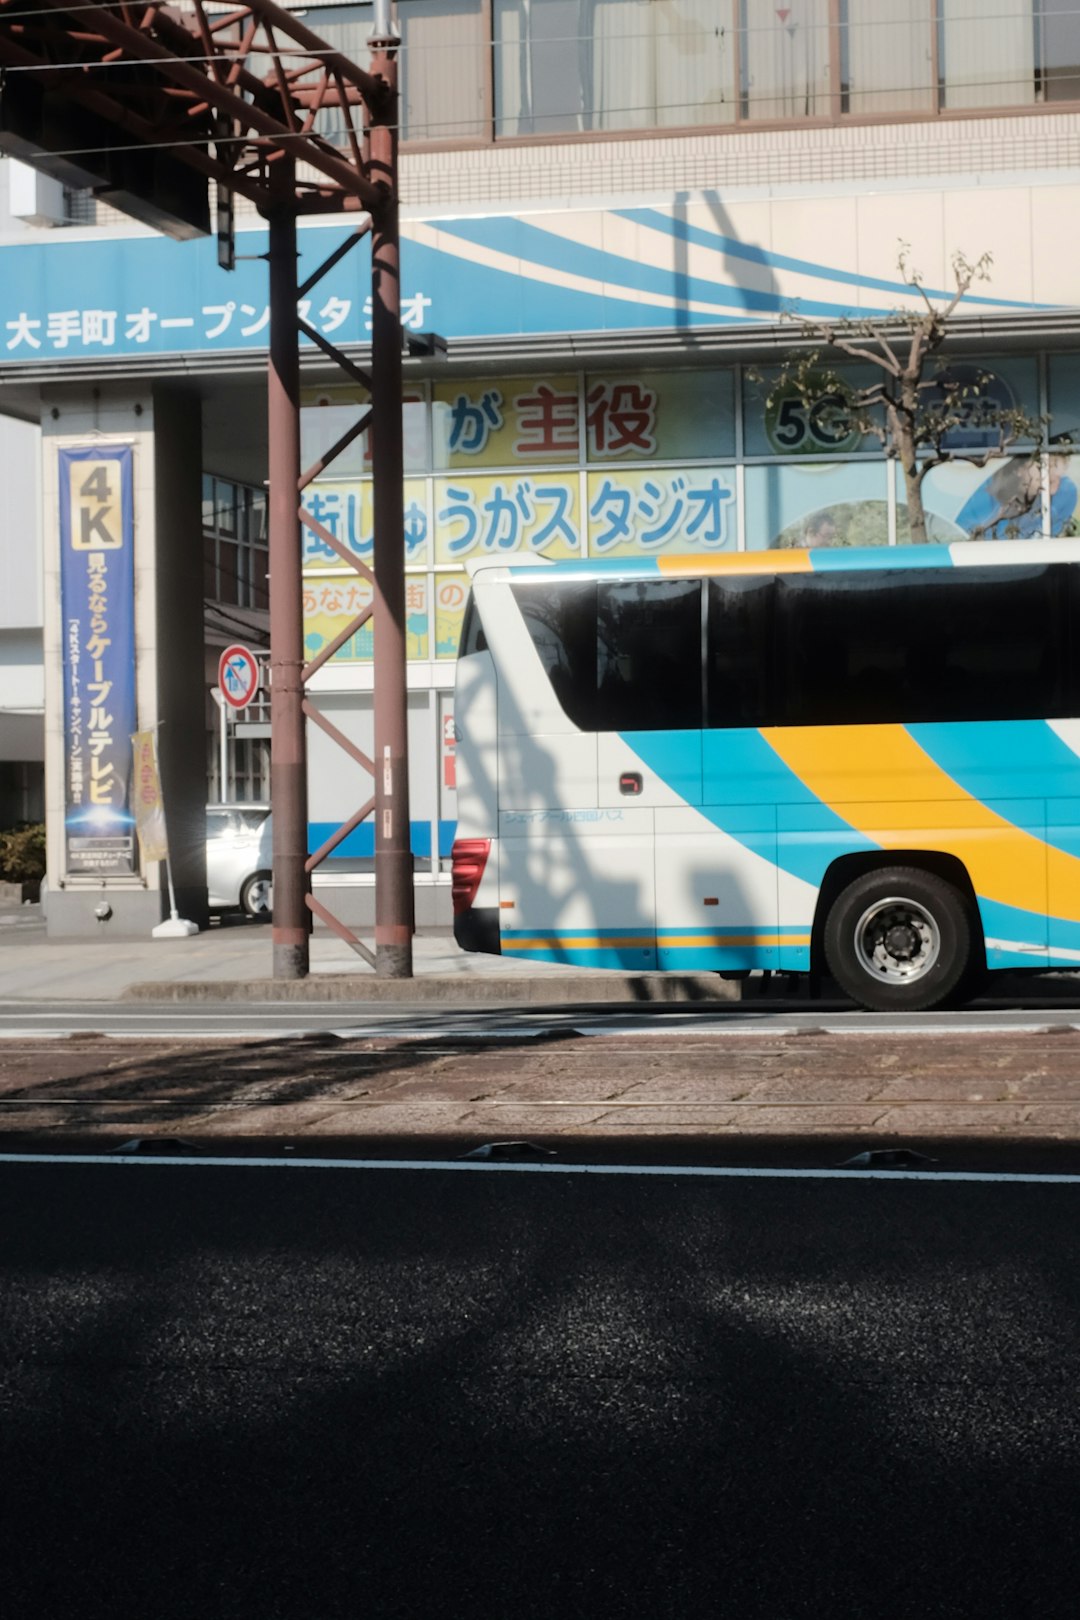 blue and white bus on road during daytime